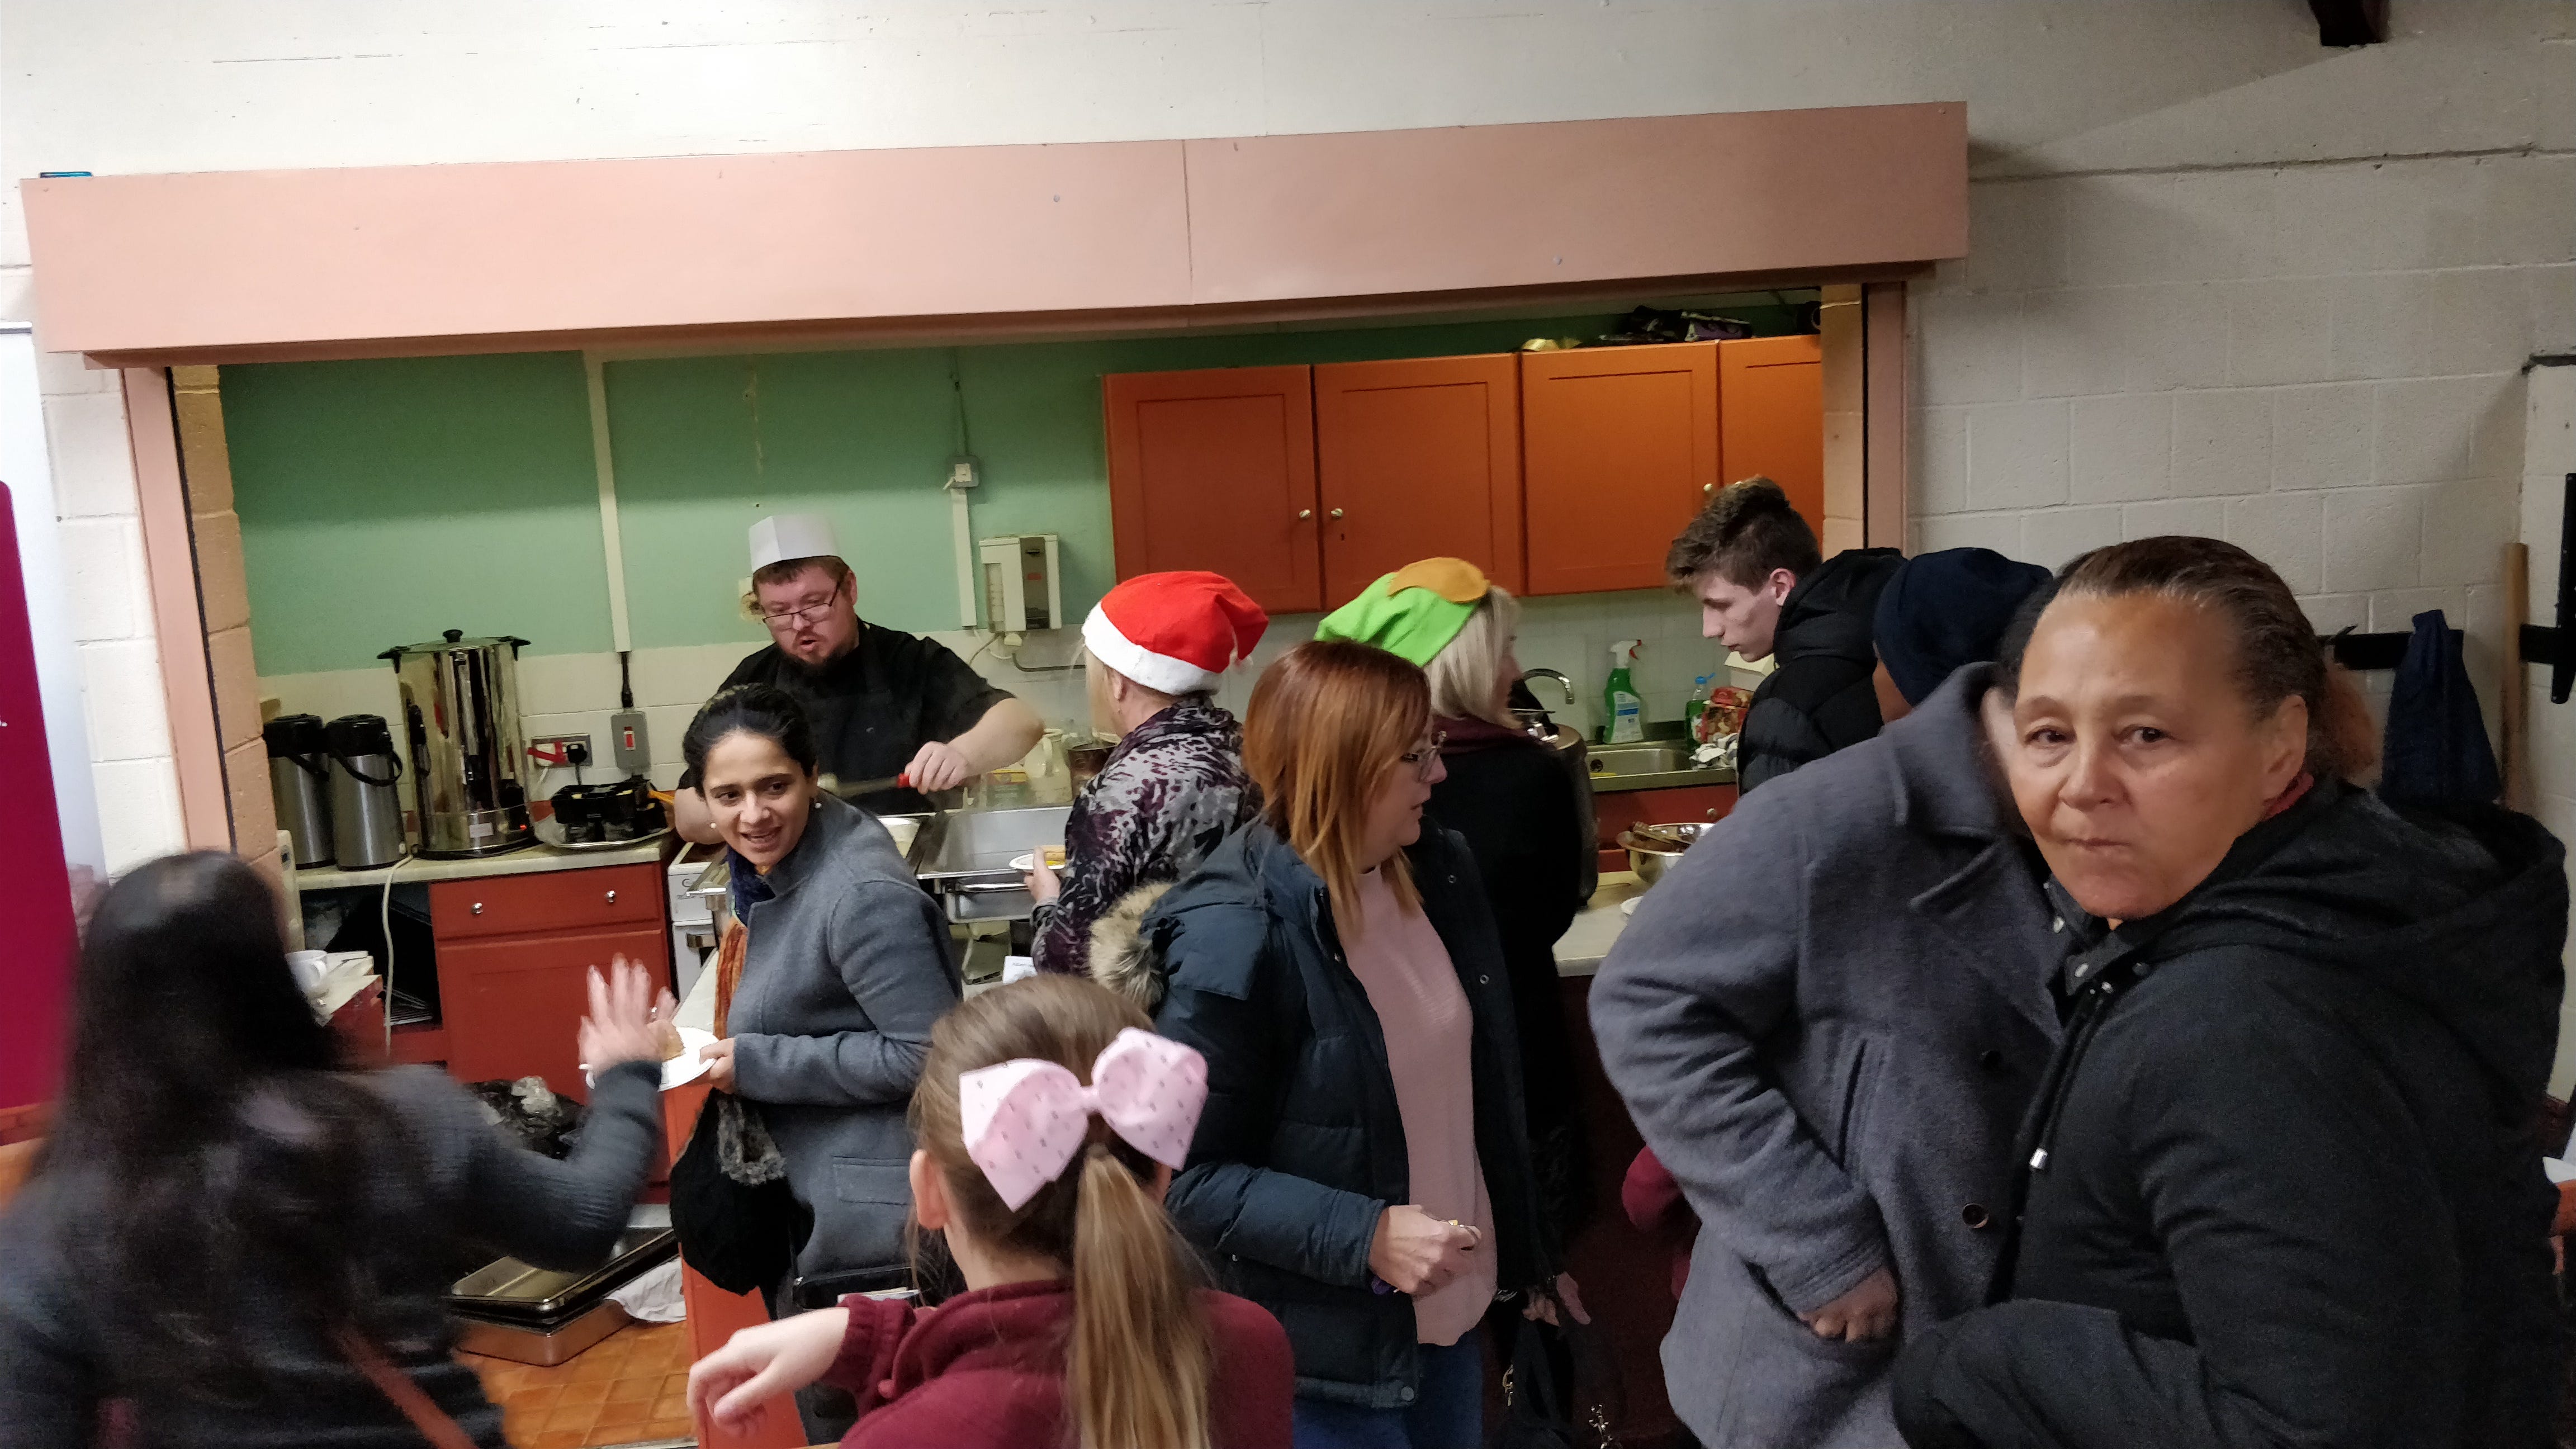 a busy canteen at christmas time